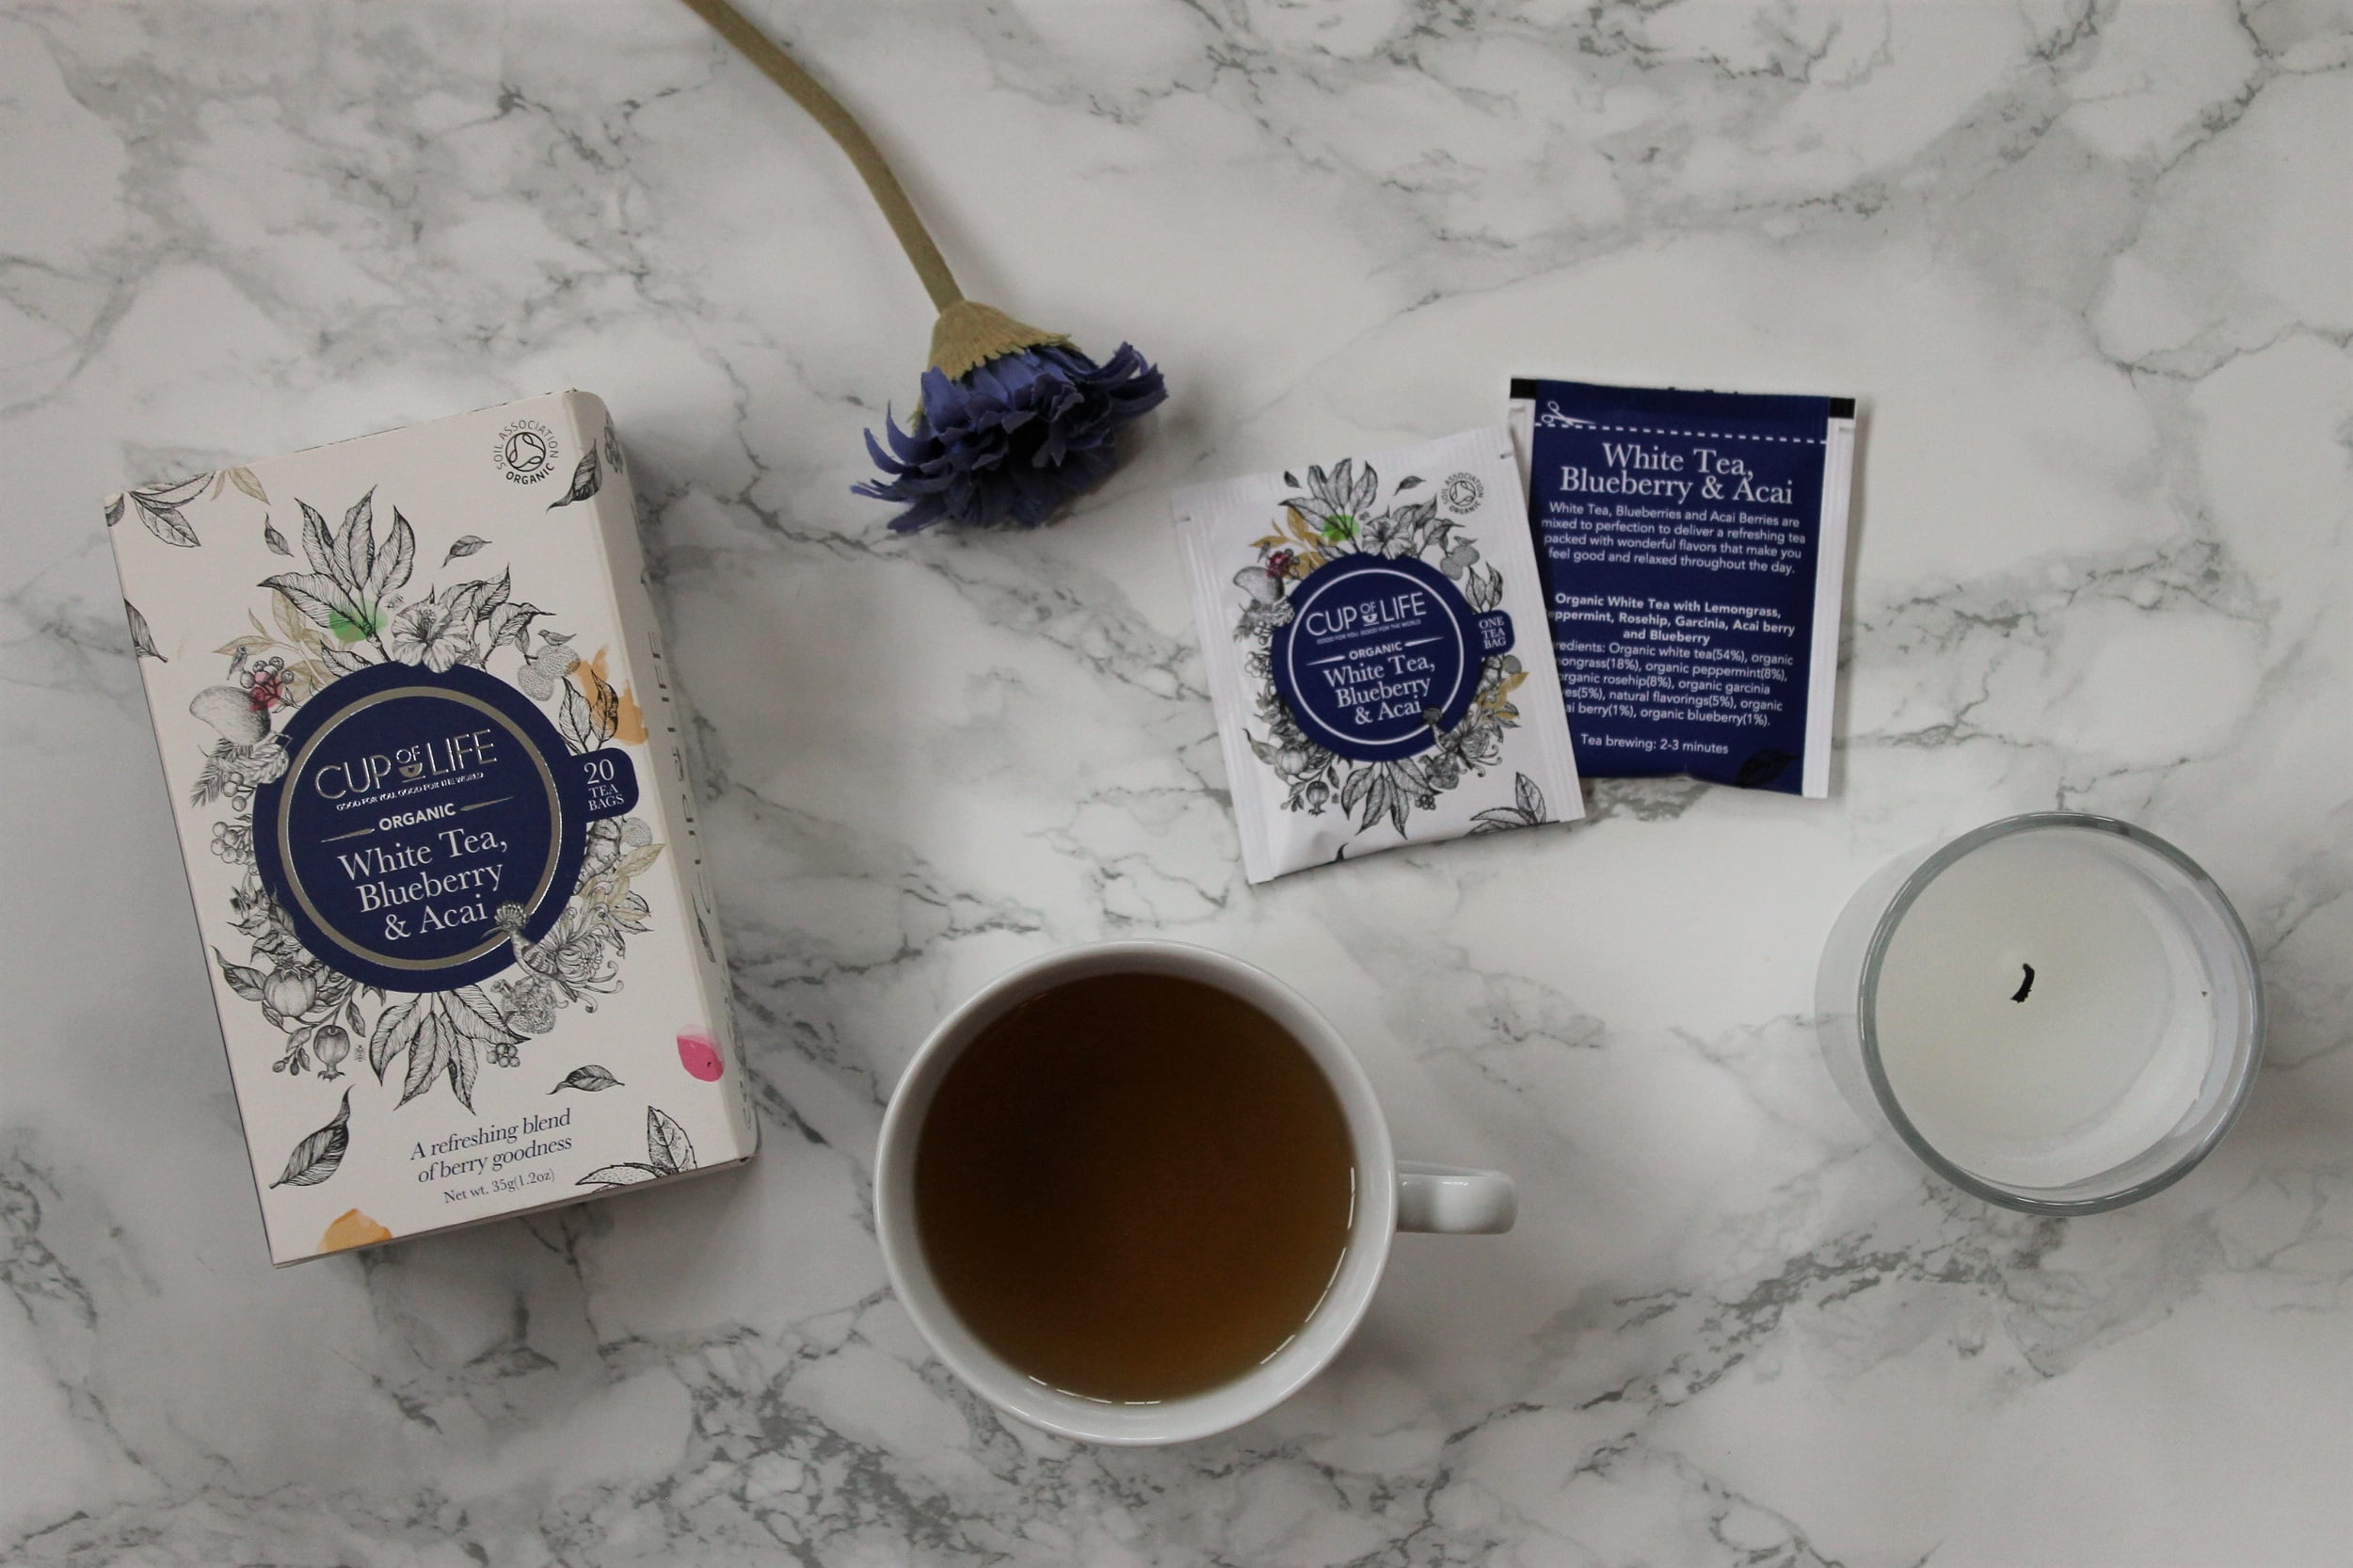 Cup of Life White Tea, Blueberry & Acai Review